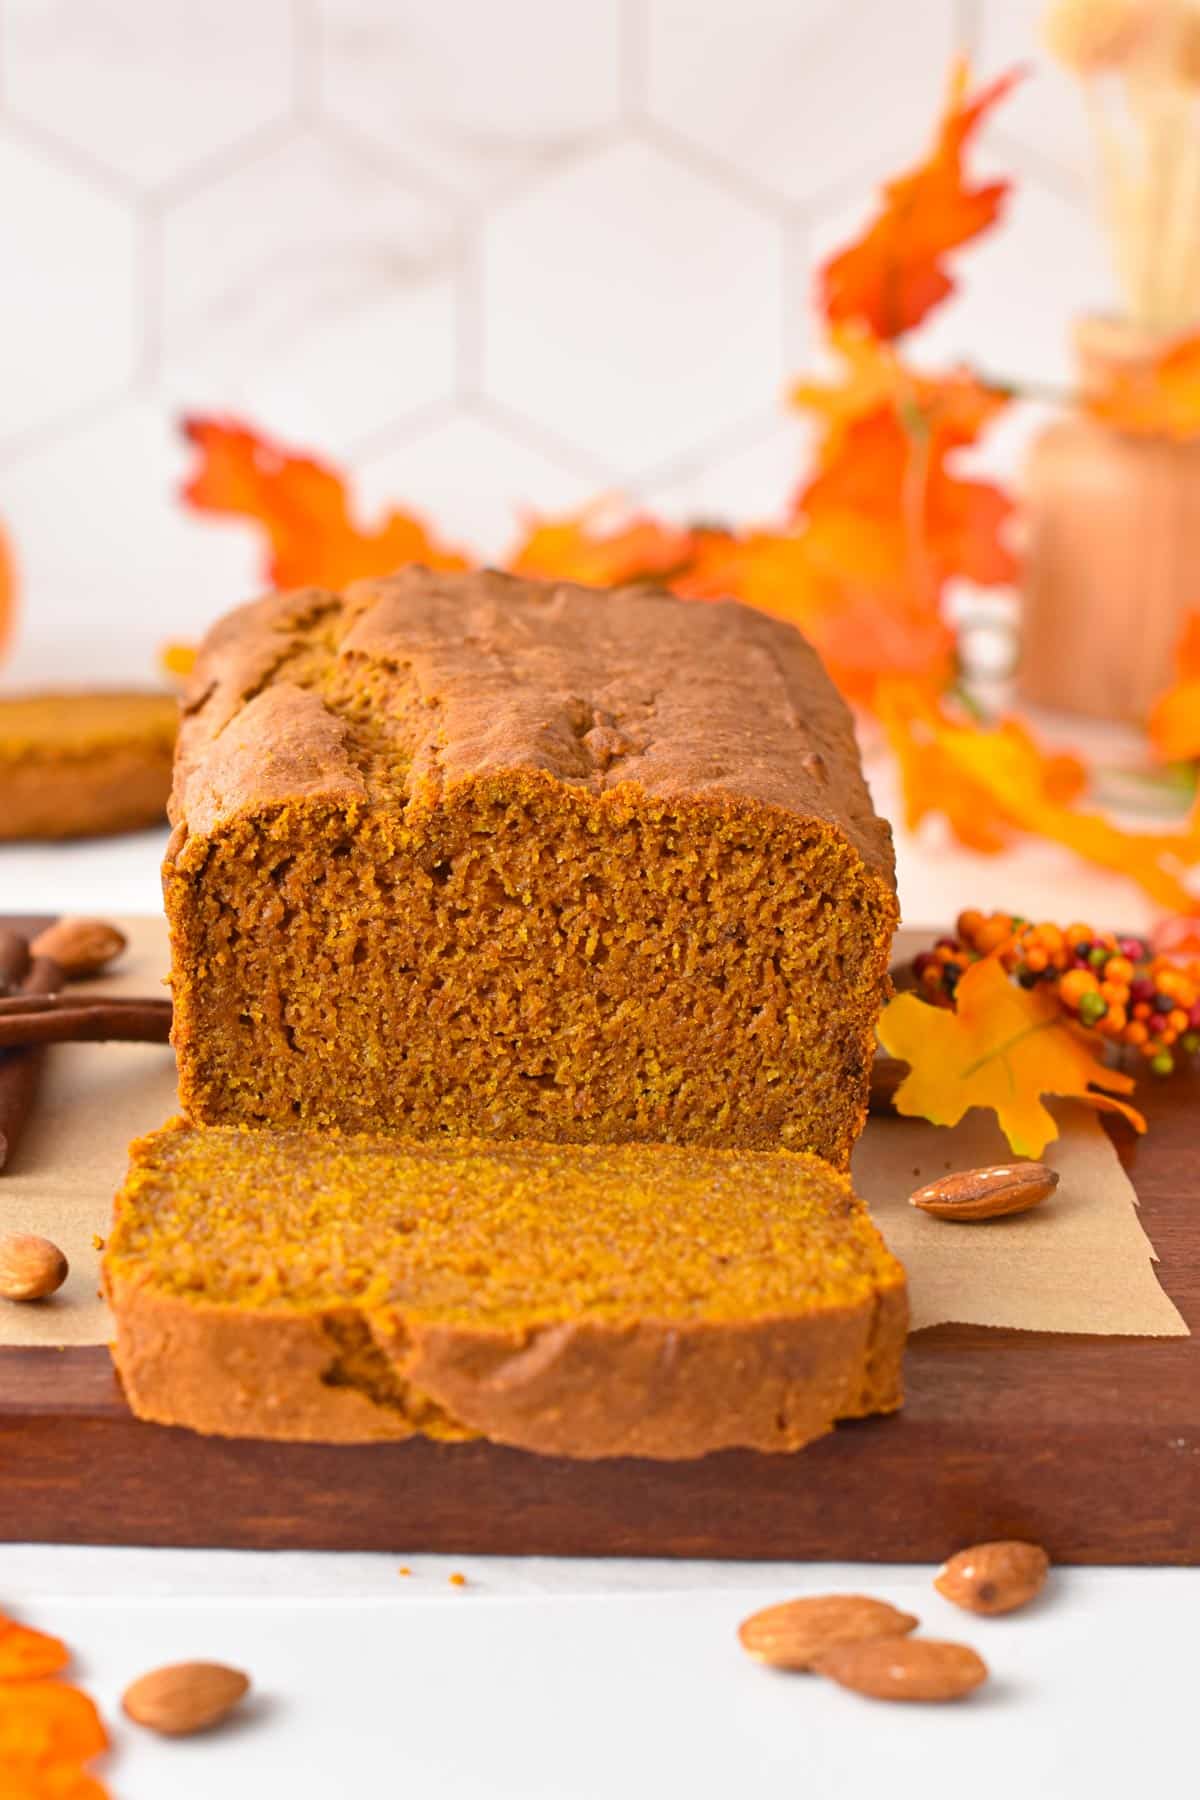 A sliced vegan gluten-free pumpkin bread with fall decoration in the background